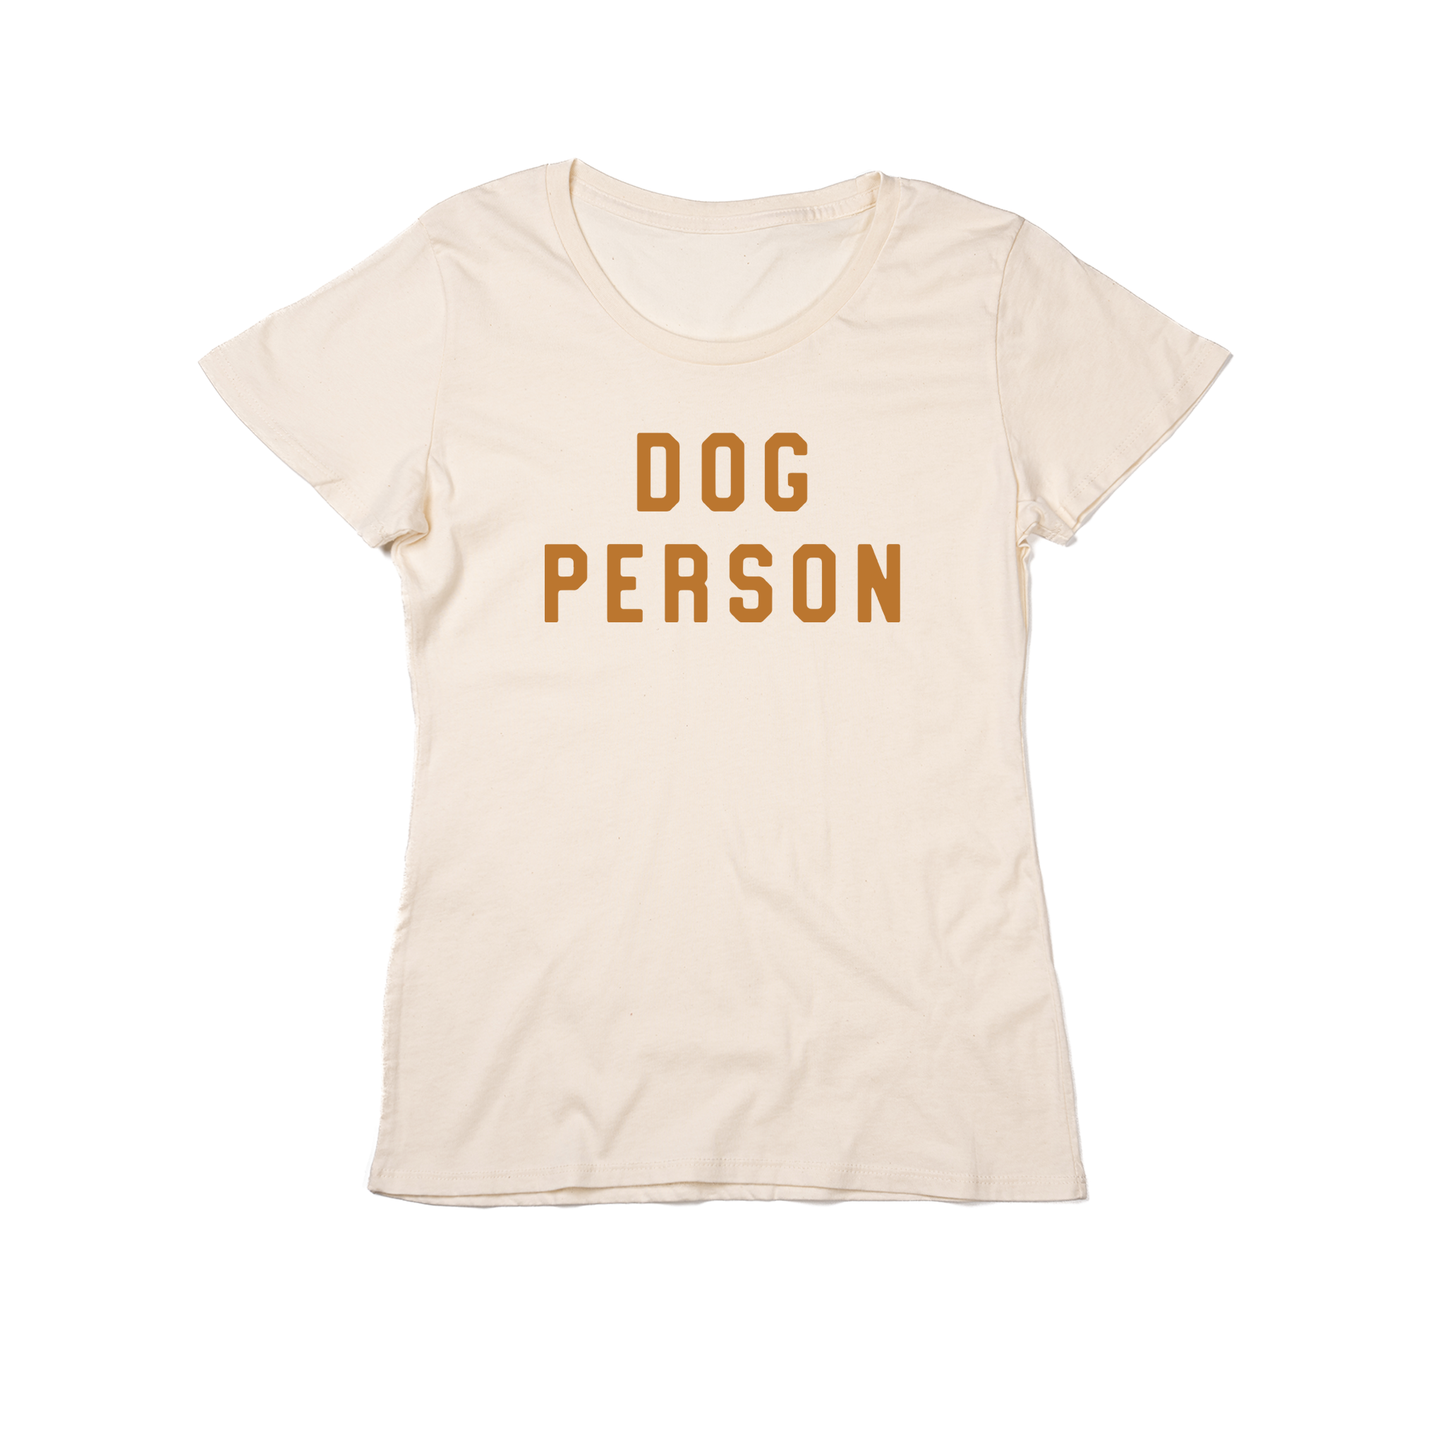 Dog Person (Camel) - Women's Fitted Tee (Natural)